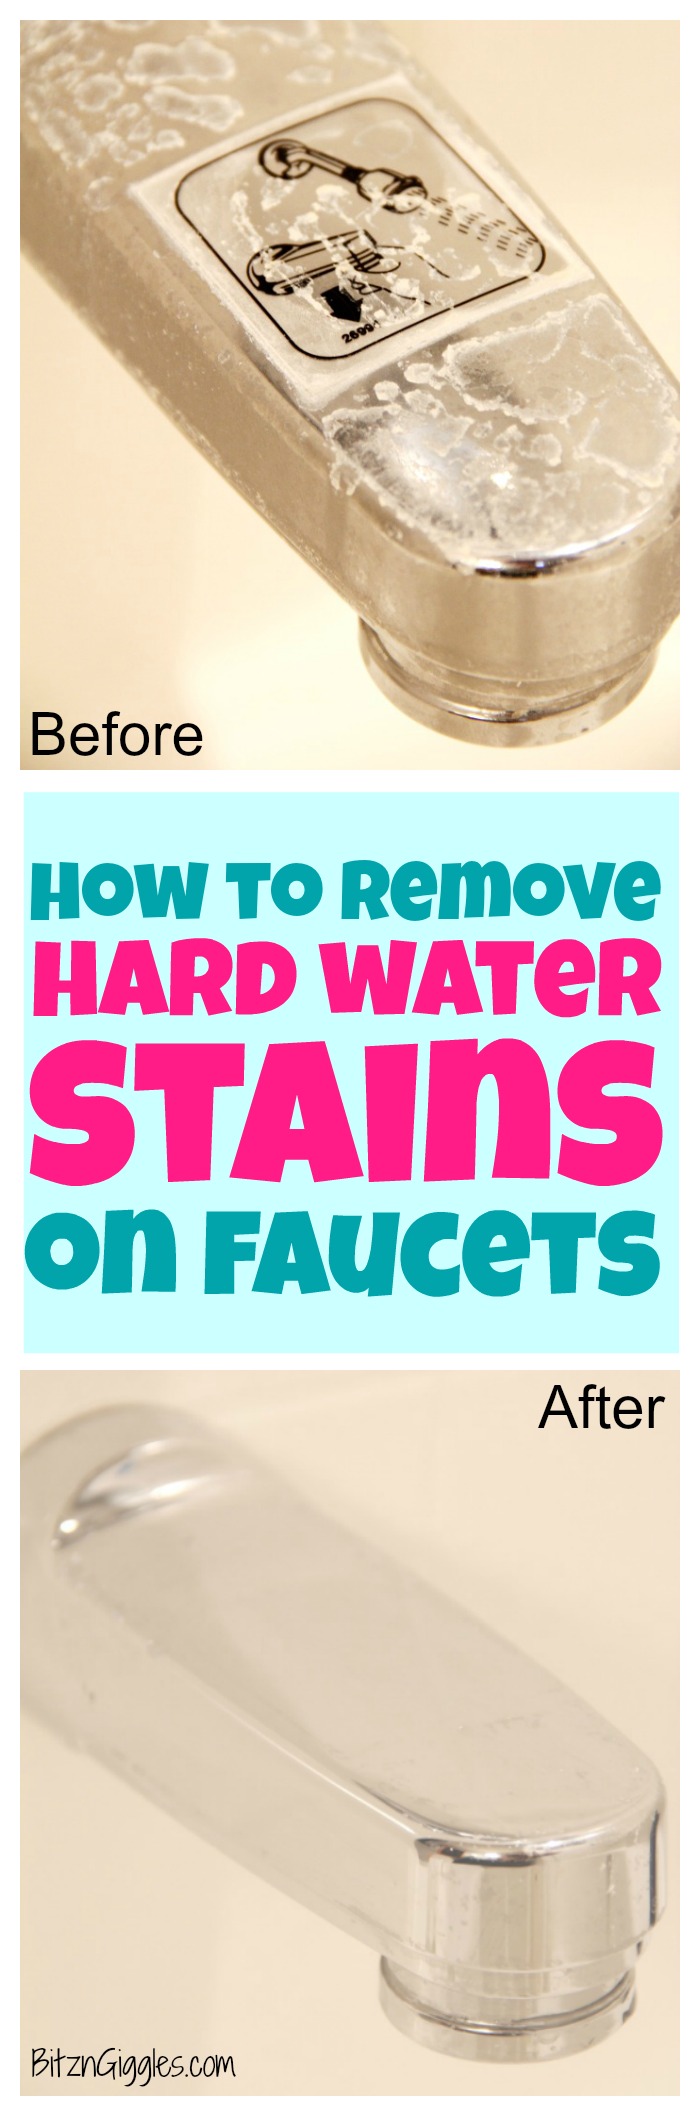 How to Remove Hard Water Stains on Faucets - When cleaning products aren't effective on removing your hard water stains, try this easy DIY solution!